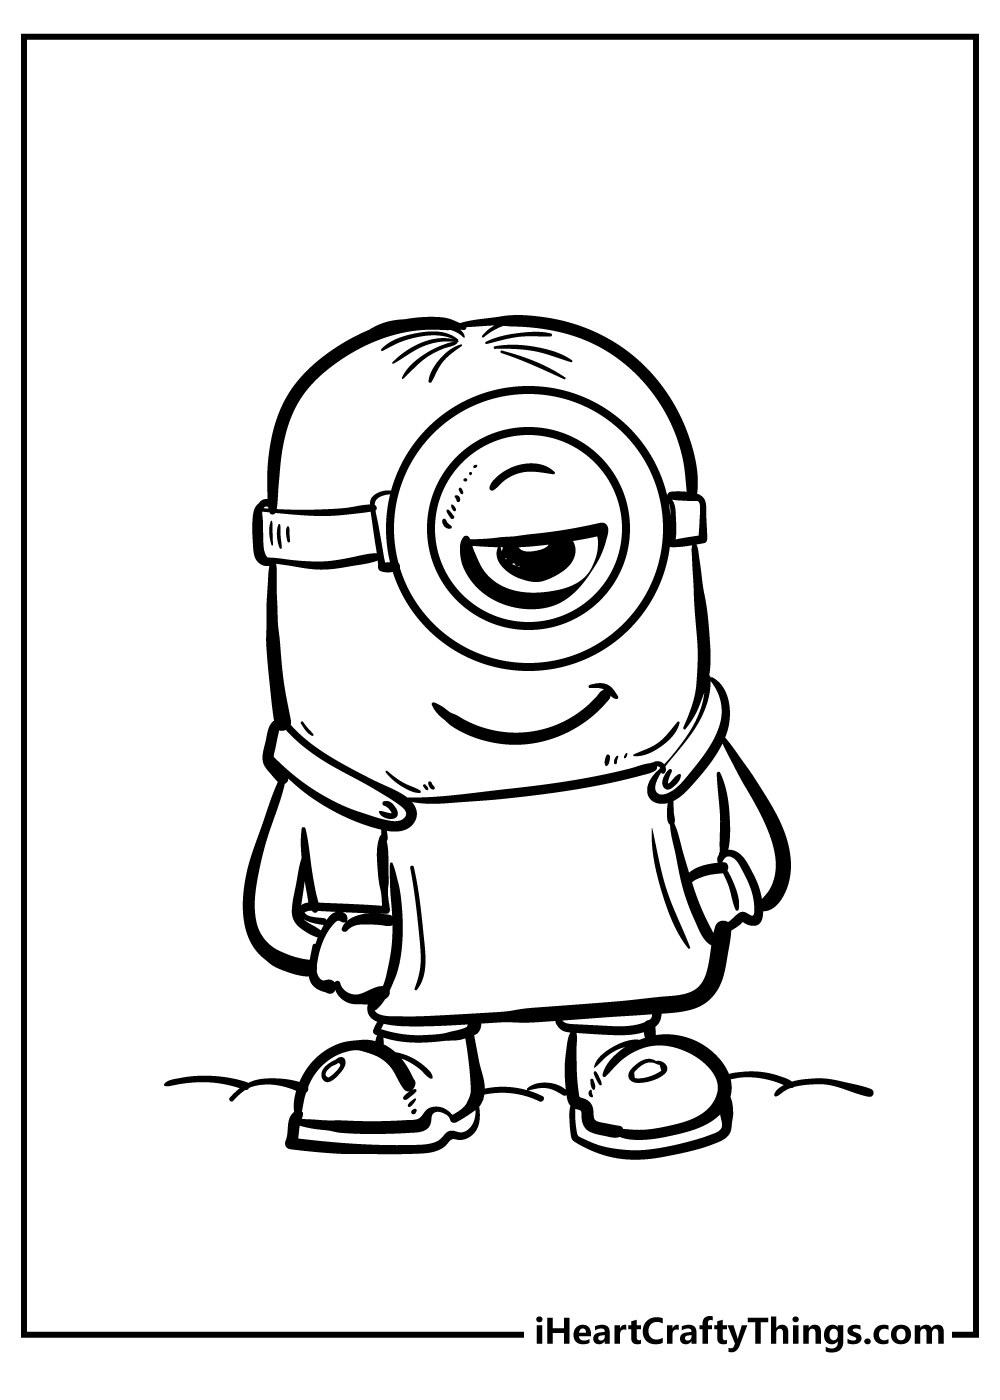 Printable Minions Coloring Pages Updated 20